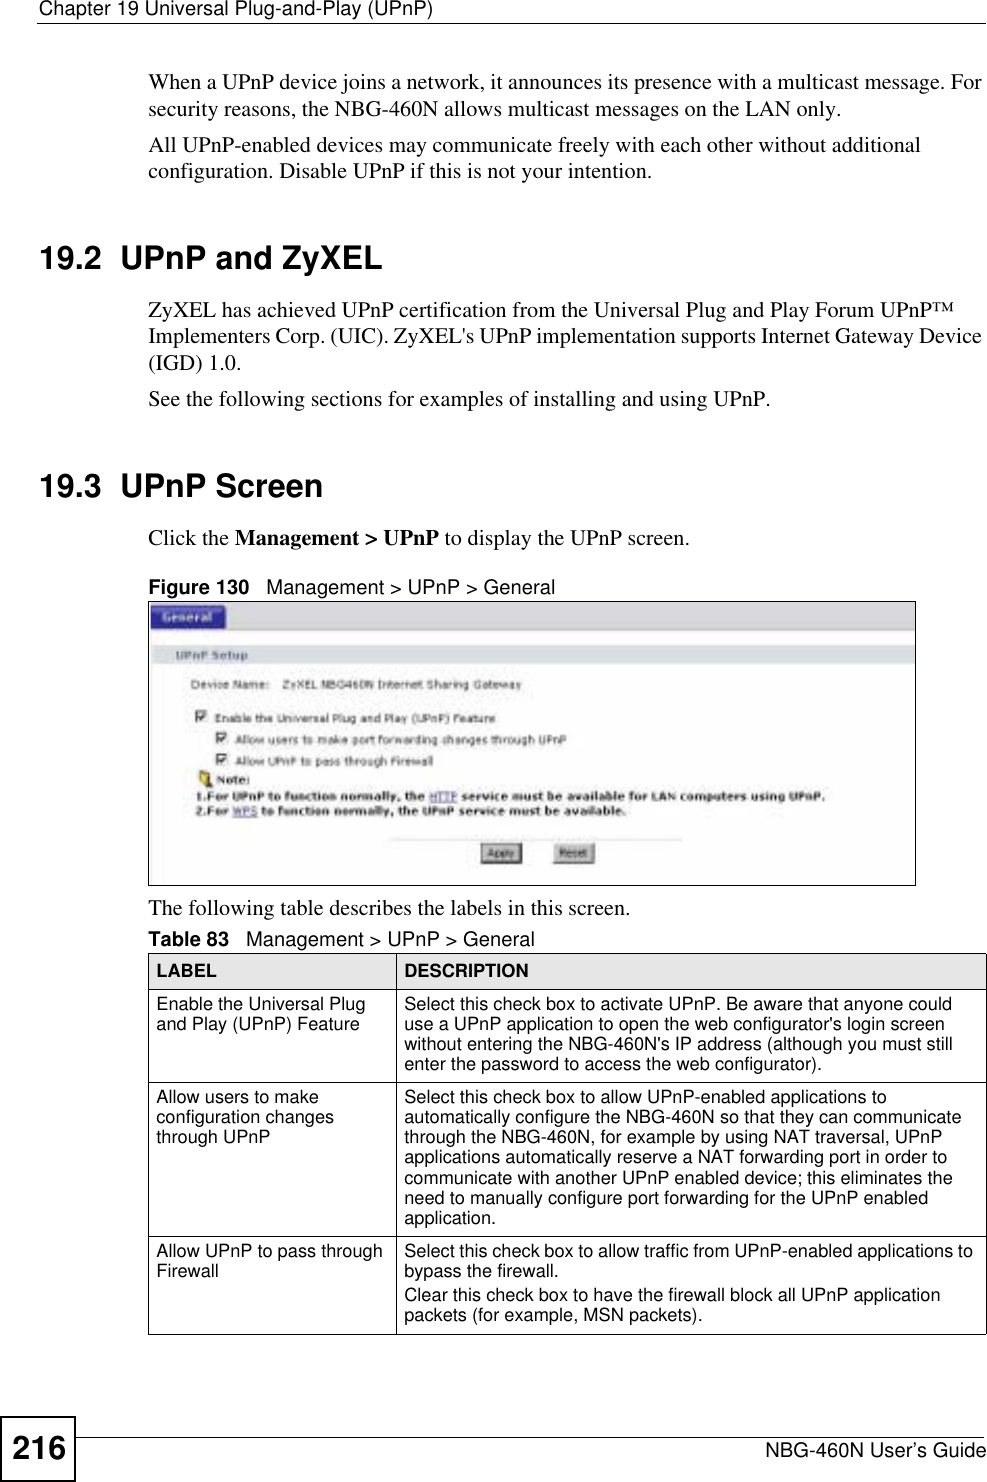 Chapter 19 Universal Plug-and-Play (UPnP)NBG-460N User’s Guide216When a UPnP device joins a network, it announces its presence with a multicast message. For security reasons, the NBG-460N allows multicast messages on the LAN only.All UPnP-enabled devices may communicate freely with each other without additional configuration. Disable UPnP if this is not your intention. 19.2  UPnP and ZyXELZyXEL has achieved UPnP certification from the Universal Plug and Play Forum UPnP™ Implementers Corp. (UIC). ZyXEL&apos;s UPnP implementation supports Internet Gateway Device (IGD) 1.0. See the following sections for examples of installing and using UPnP.19.3  UPnP ScreenClick the Management &gt; UPnP to display the UPnP screen.Figure 130   Management &gt; UPnP &gt; General The following table describes the labels in this screen. Table 83   Management &gt; UPnP &gt; GeneralLABEL DESCRIPTIONEnable the Universal Plug and Play (UPnP) Feature Select this check box to activate UPnP. Be aware that anyone could use a UPnP application to open the web configurator&apos;s login screen without entering the NBG-460N&apos;s IP address (although you must still enter the password to access the web configurator).Allow users to make configuration changes through UPnPSelect this check box to allow UPnP-enabled applications to automatically configure the NBG-460N so that they can communicate through the NBG-460N, for example by using NAT traversal, UPnP applications automatically reserve a NAT forwarding port in order to communicate with another UPnP enabled device; this eliminates the need to manually configure port forwarding for the UPnP enabled application. Allow UPnP to pass through Firewall Select this check box to allow traffic from UPnP-enabled applications to bypass the firewall. Clear this check box to have the firewall block all UPnP application packets (for example, MSN packets).